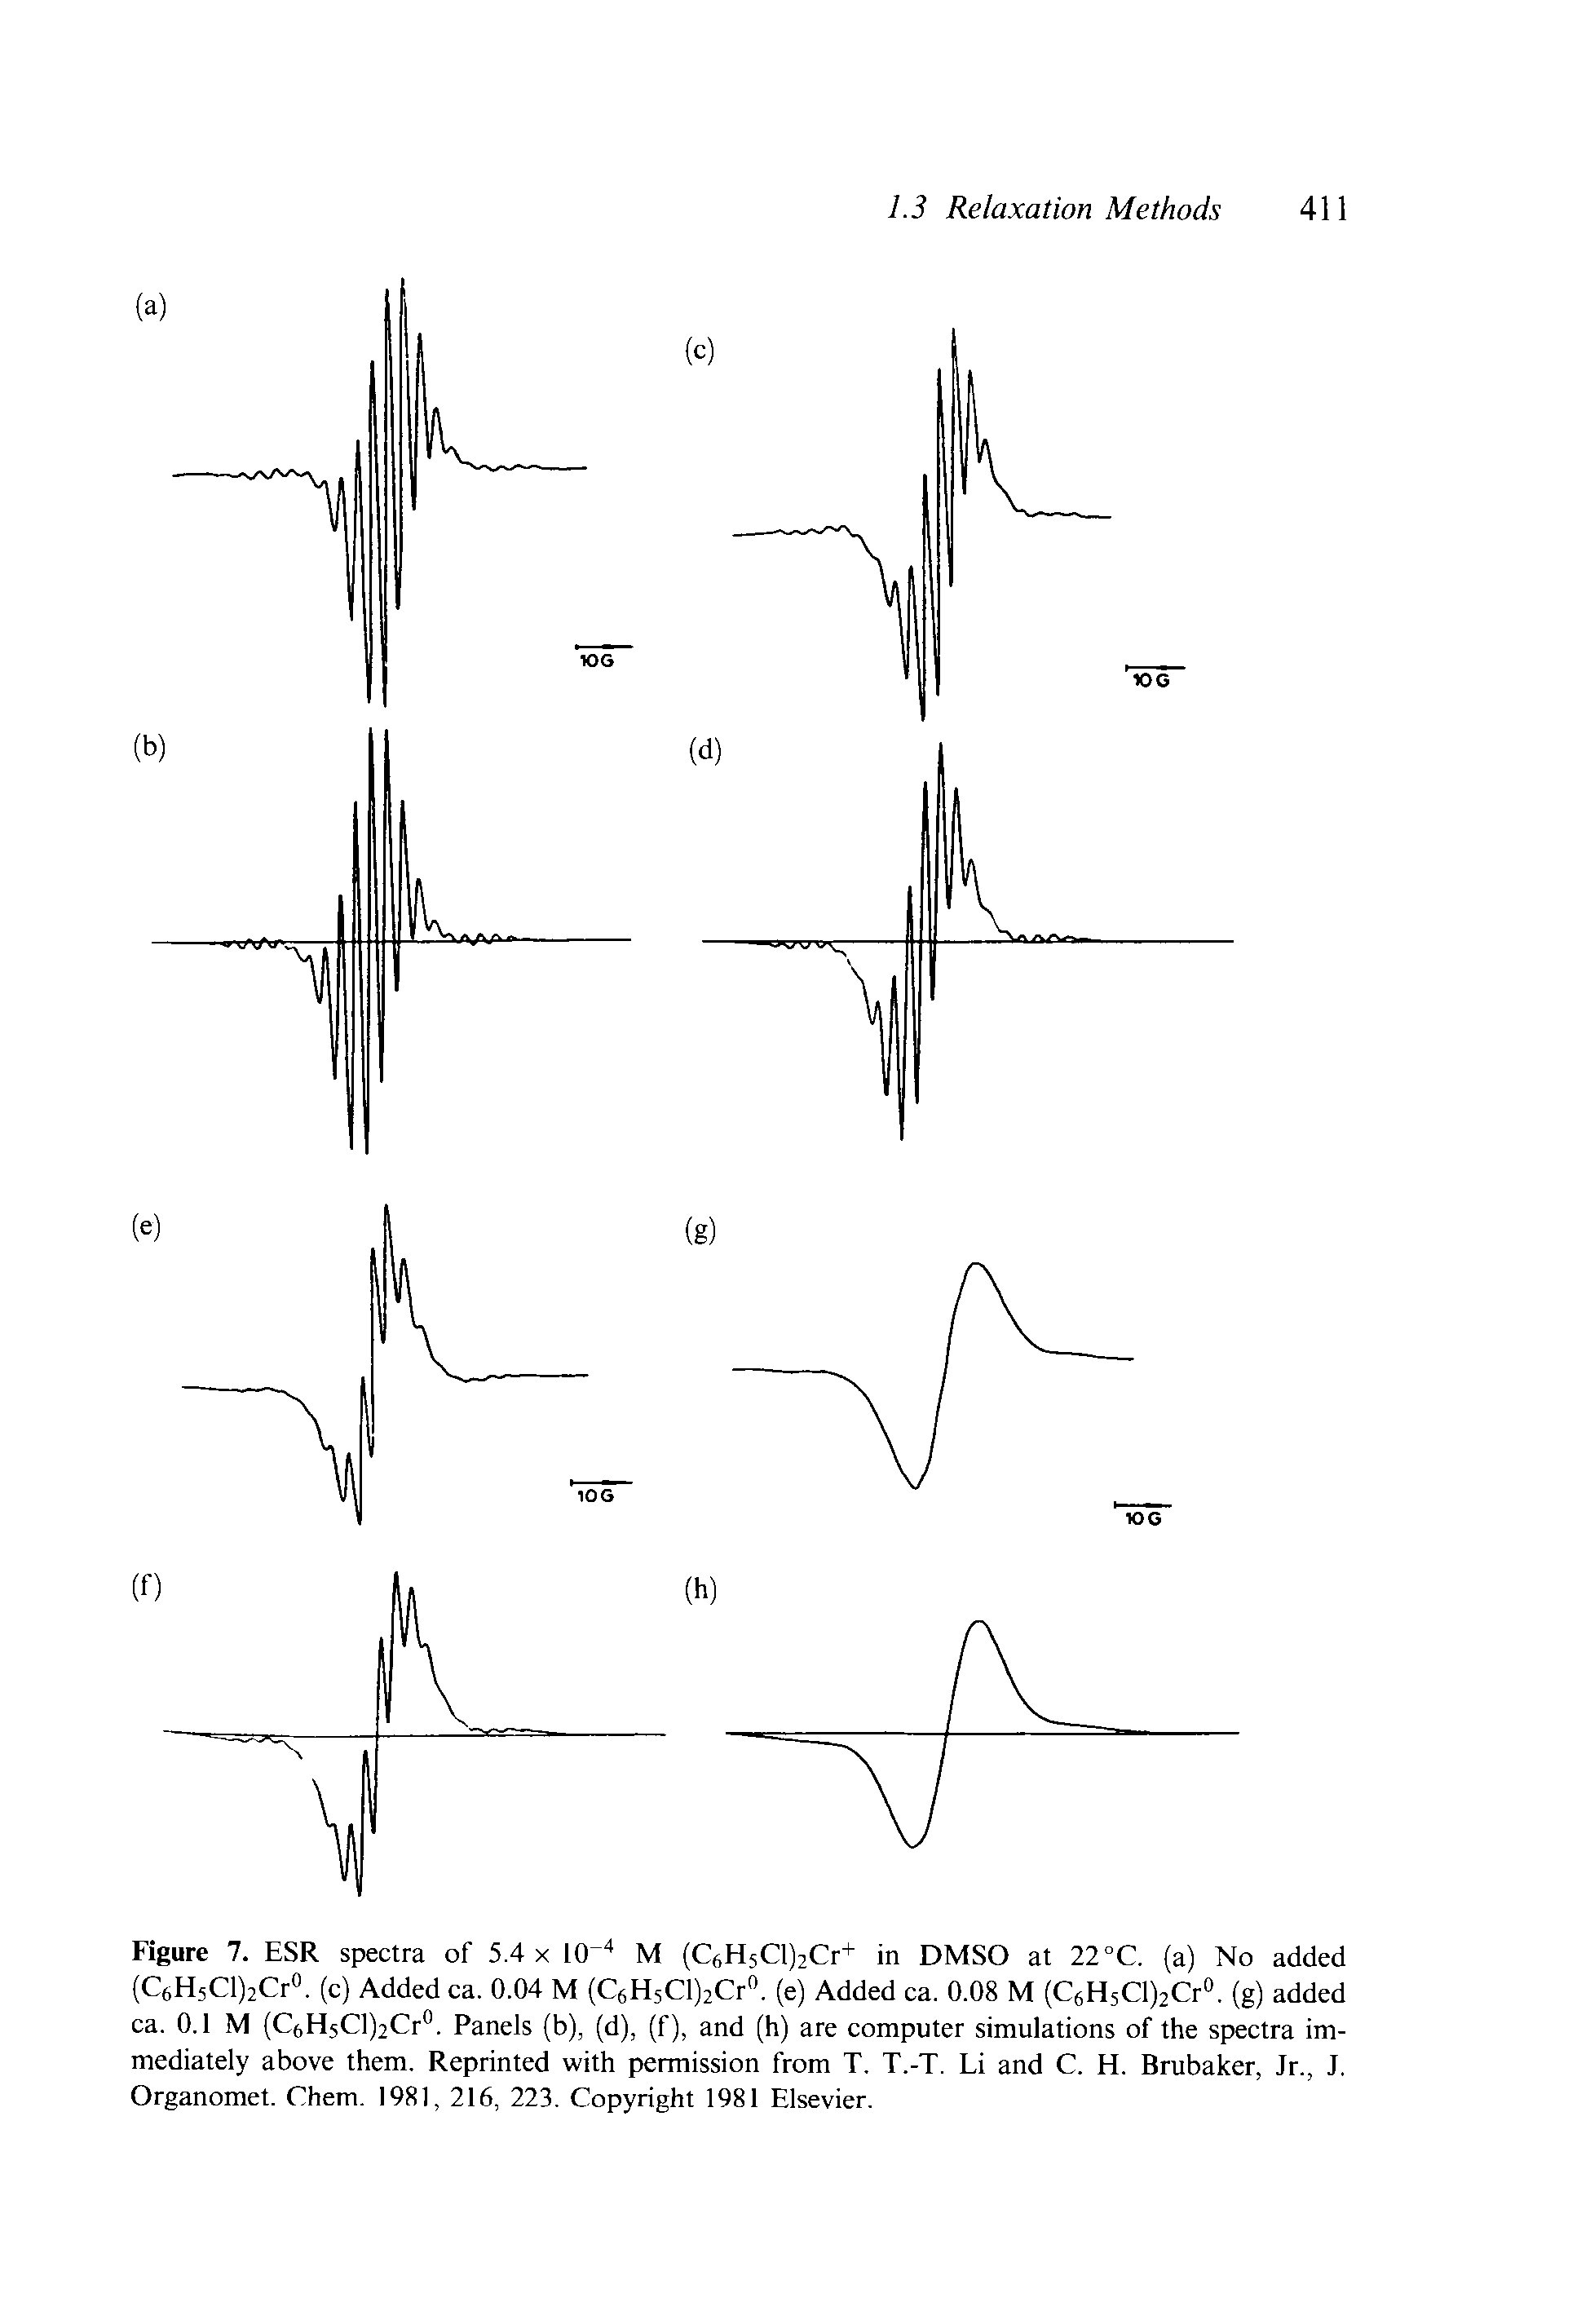 Figure 7. ESR spectra of 5.4 x IQ- M (C6H5Cl)2Cr+ in DMSO at 22 °C. (a) No added (CeHsClljCfO. (c) Added ca. 0.04 M (CgHsClljCr". (e) Added ca. 0.08 M (C6H5Cl)2Cr . (g) added ca. 0.1 M (Cf H5Cl)2Cr . Panels (b), (d), (f), and (h) are computer simulations of the spectra immediately above them. Reprinted with permission from T, T.-T. Li and C. H. Brubaker, Jr., J. Organomet. Chem. 1981, 216, 223. Copyright 1981 Elsevier.